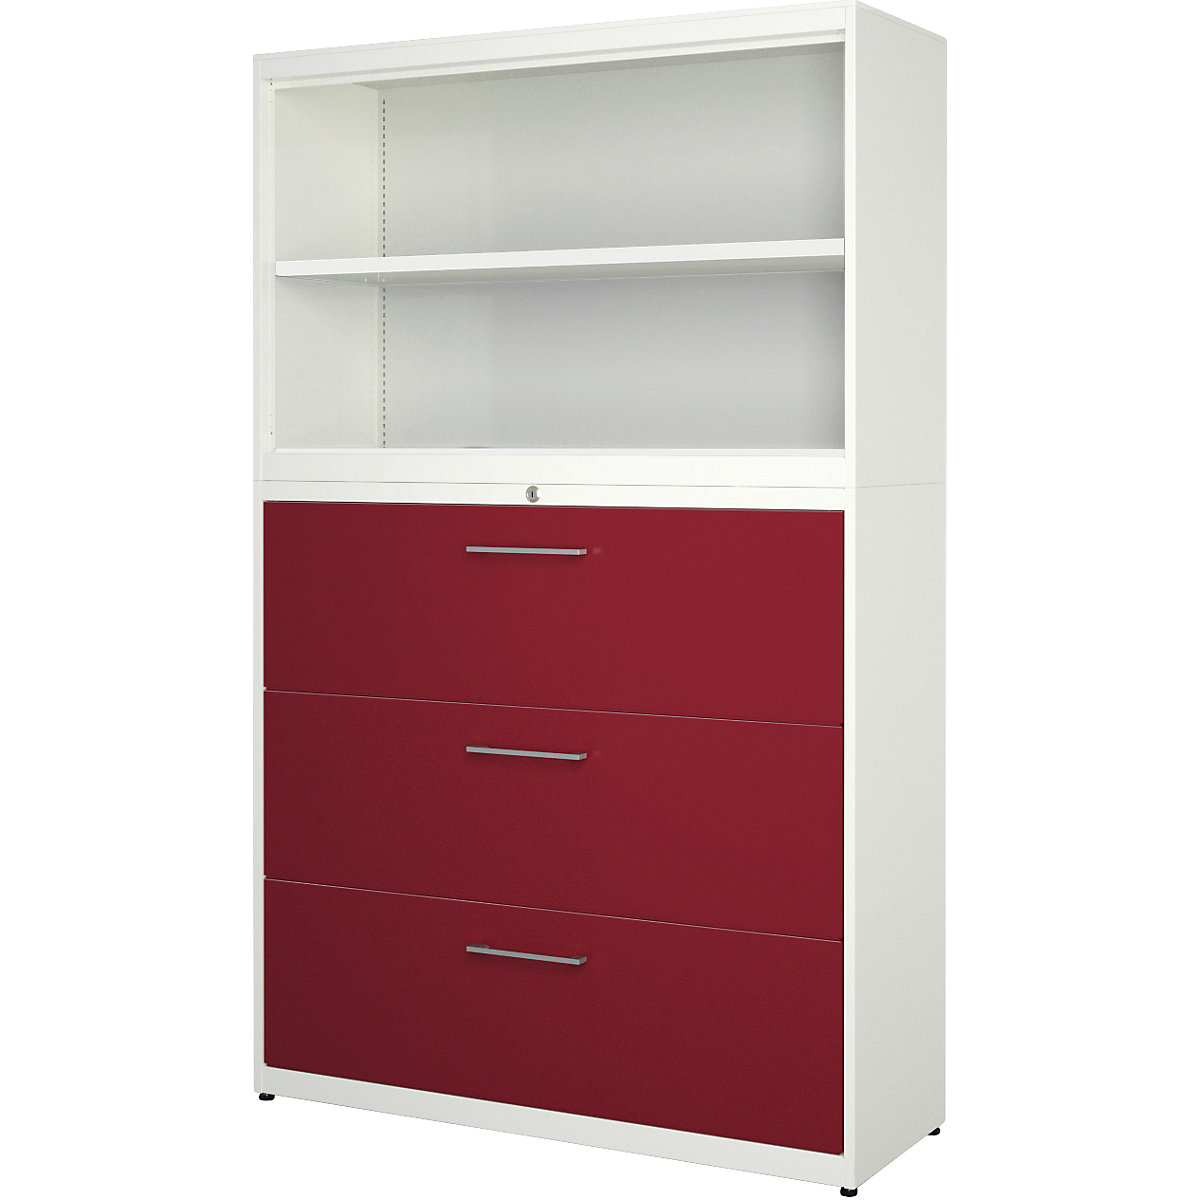 Cupboard combination with suspension filing drawers - mauser